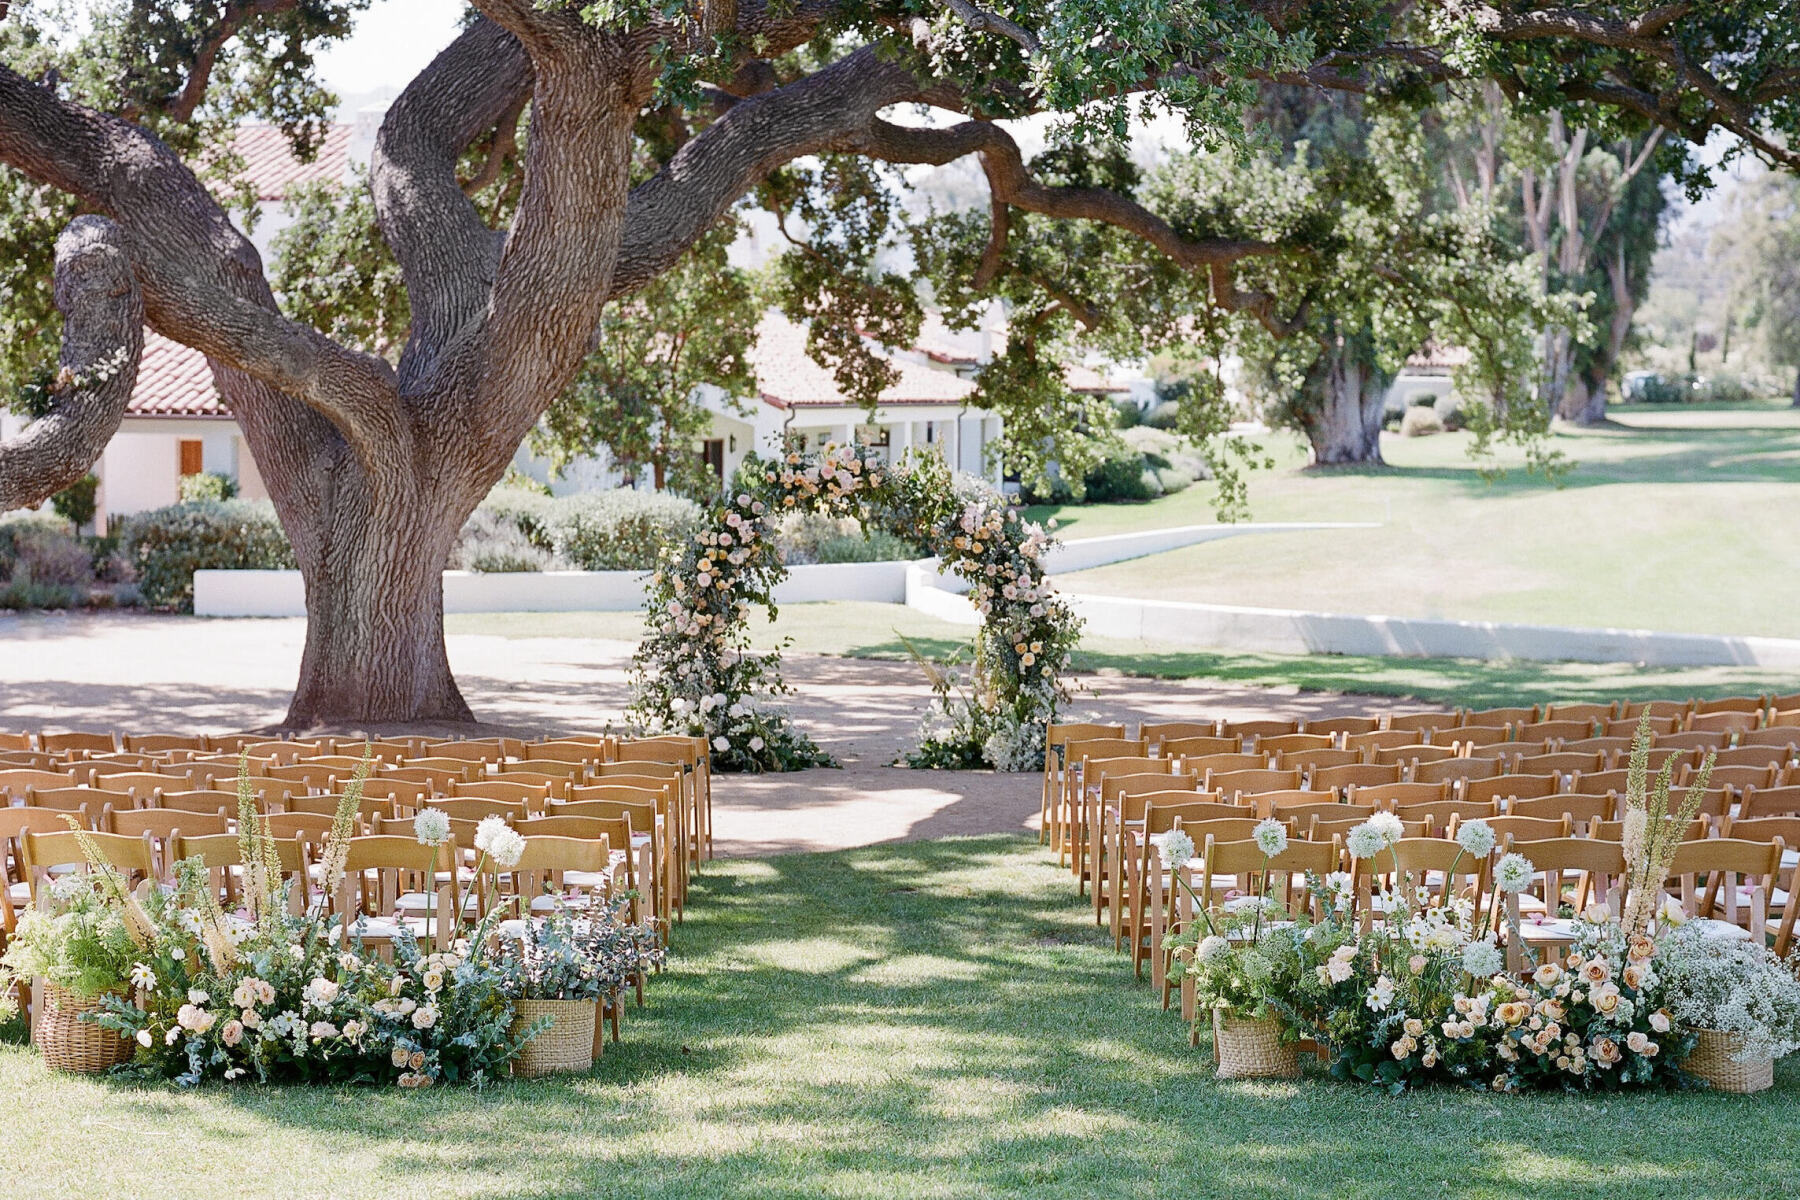 Wedding Etiquette: Wedding reception setup under a large oak tree, with an aisle lined with spring flowers and greenery, leading to a wedding arch made of the same flowers.